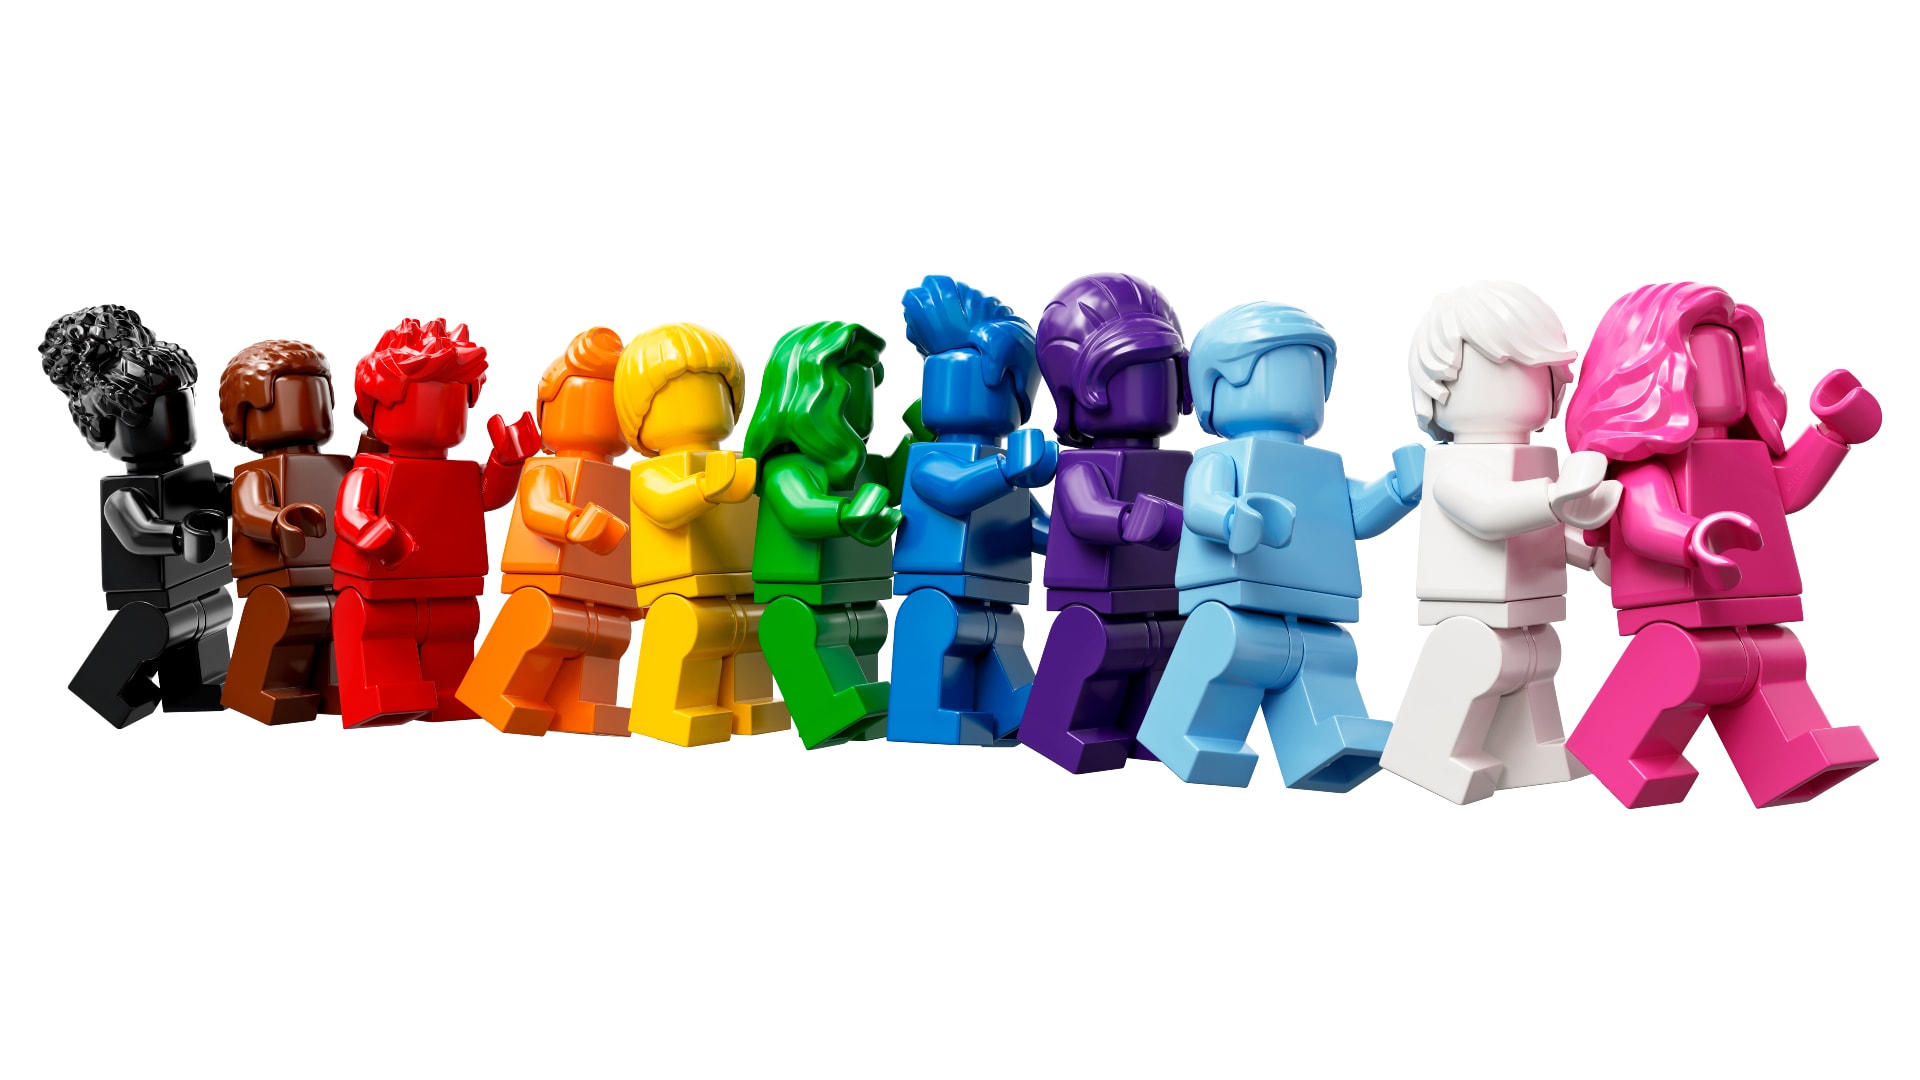 Lego is gay now, thanks to 'Everyone is Awesome' Pride set - but why is it  18+ rated? - Gayming Magazine